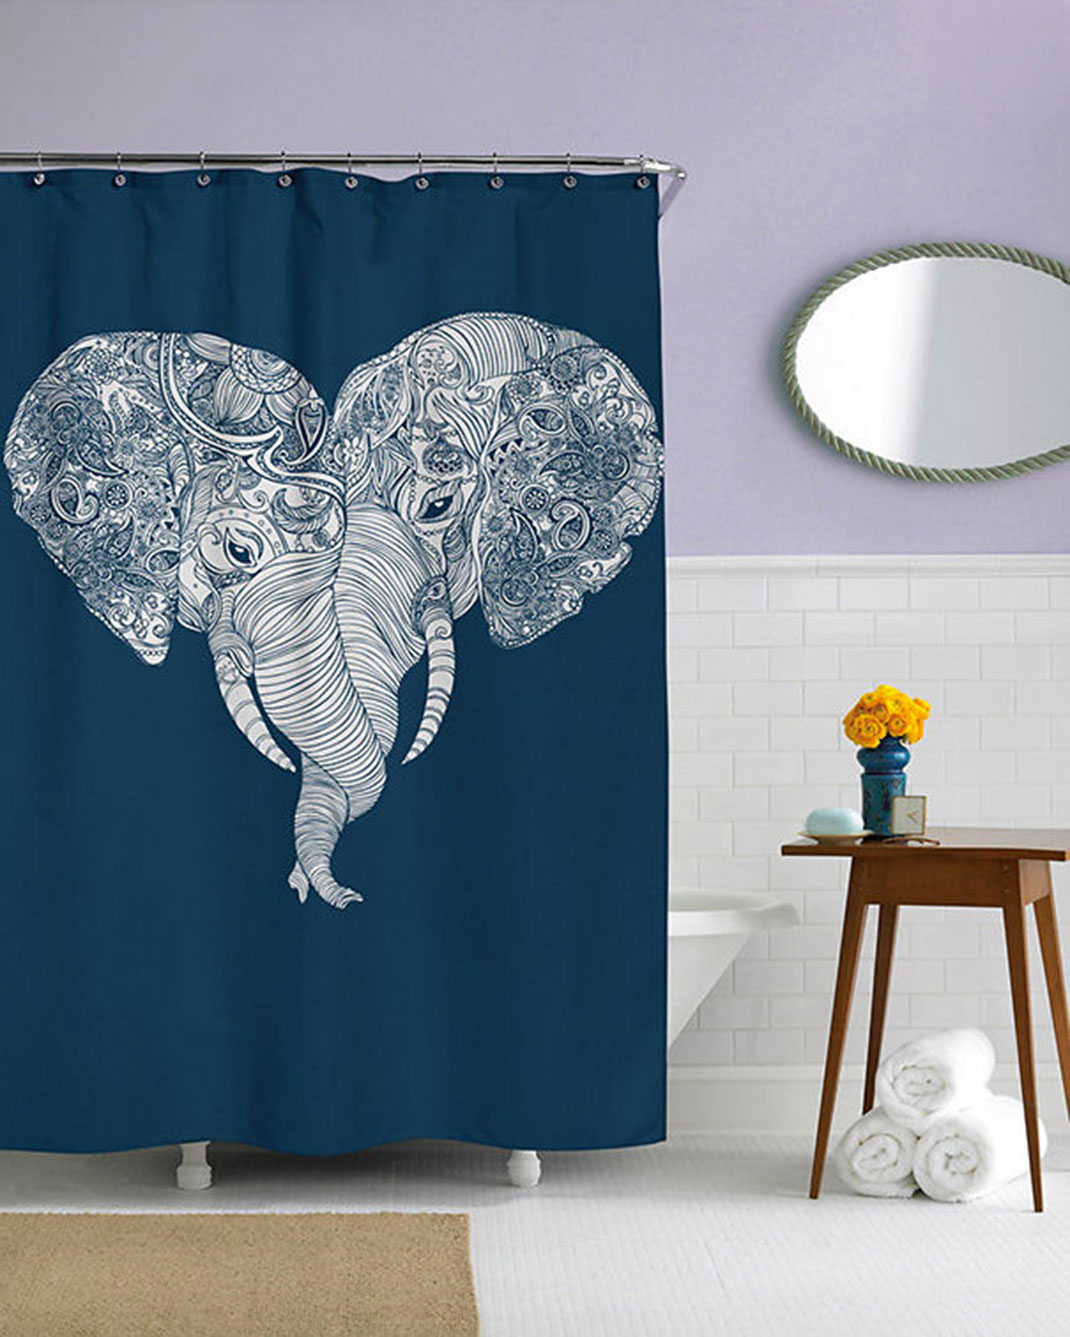 45 Amazing Daily Use Objects For The Lovers Of Elephants-10